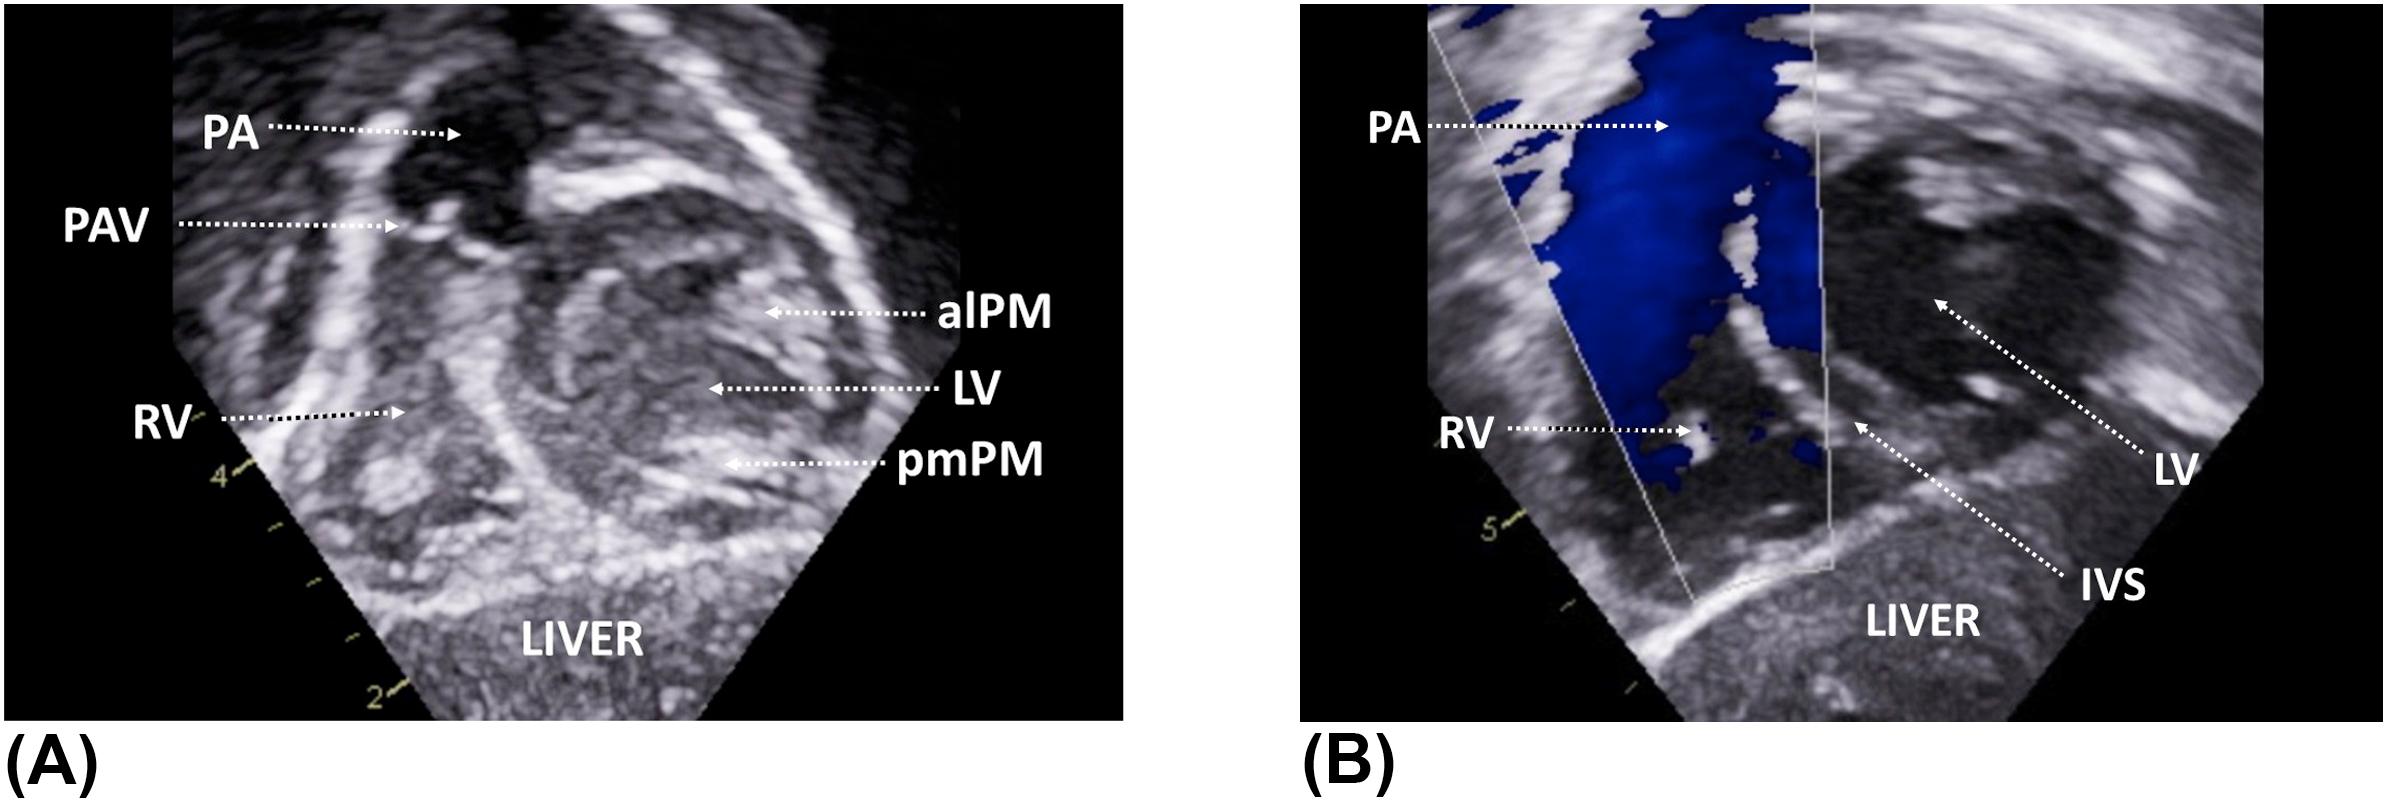 Figure 10, (A) Subcostal short-axis view showing the entire right ventricular outflow tract. (B) Corresponding color flow Doppler. (C) The probe is further tilted to the patient's right as compared to the previous figure. alPM , anterolateral papillary muscle; IVS , interventricular septum; LV , left ventricle; PA , pulmonary artery; PAV , pulmonary valve; pmPM , posteromedial papillary muscle; RV , right ventricle.